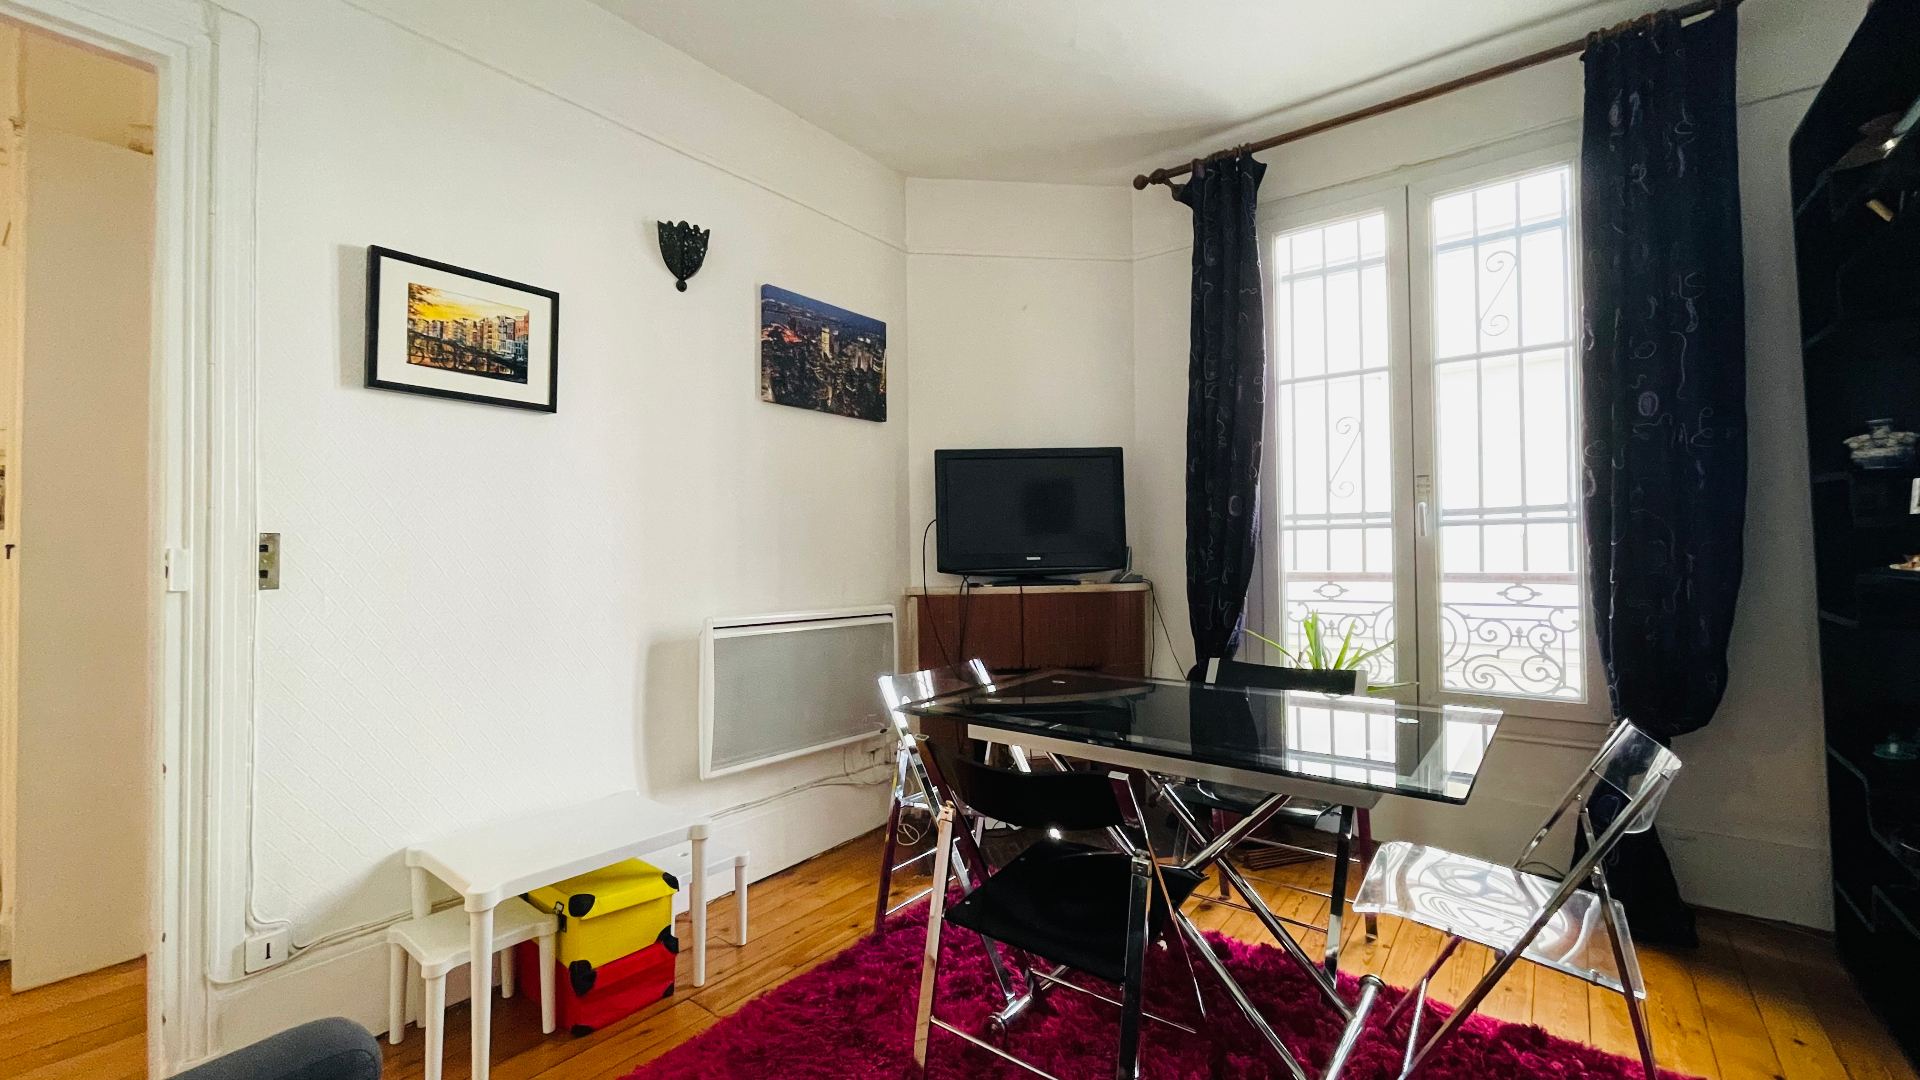 Beautiful 2 rooms in the middle of Montmartre, rue Feutrier, 50 meters from the Sacré-Coeur gardens! 1